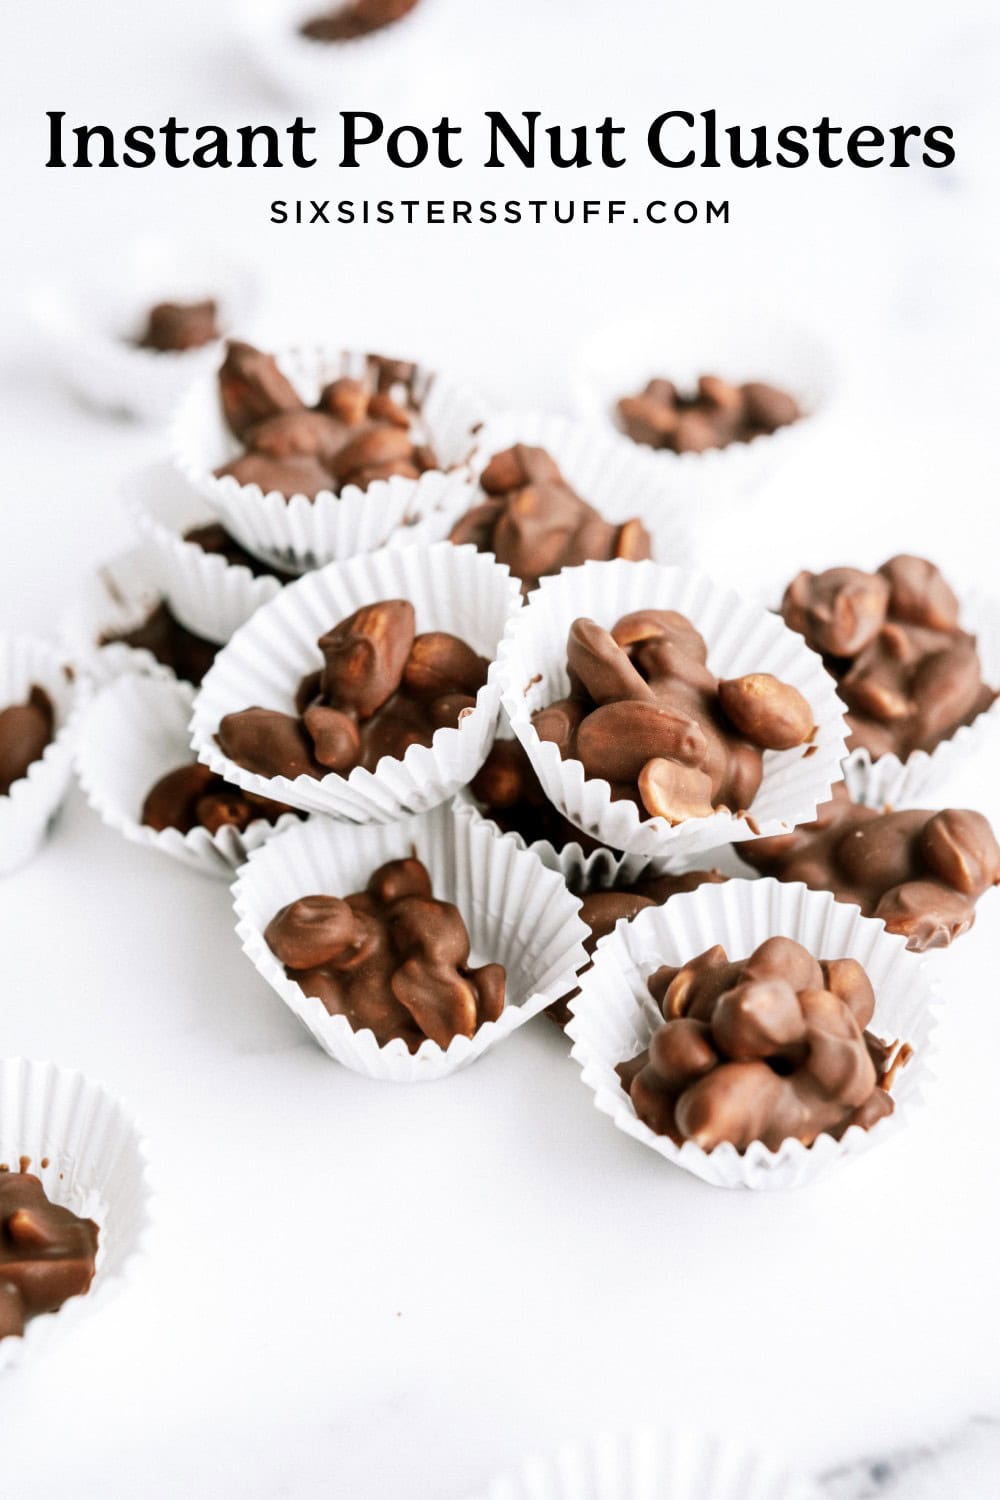 Instant pot chocolate clusters on a large white surface